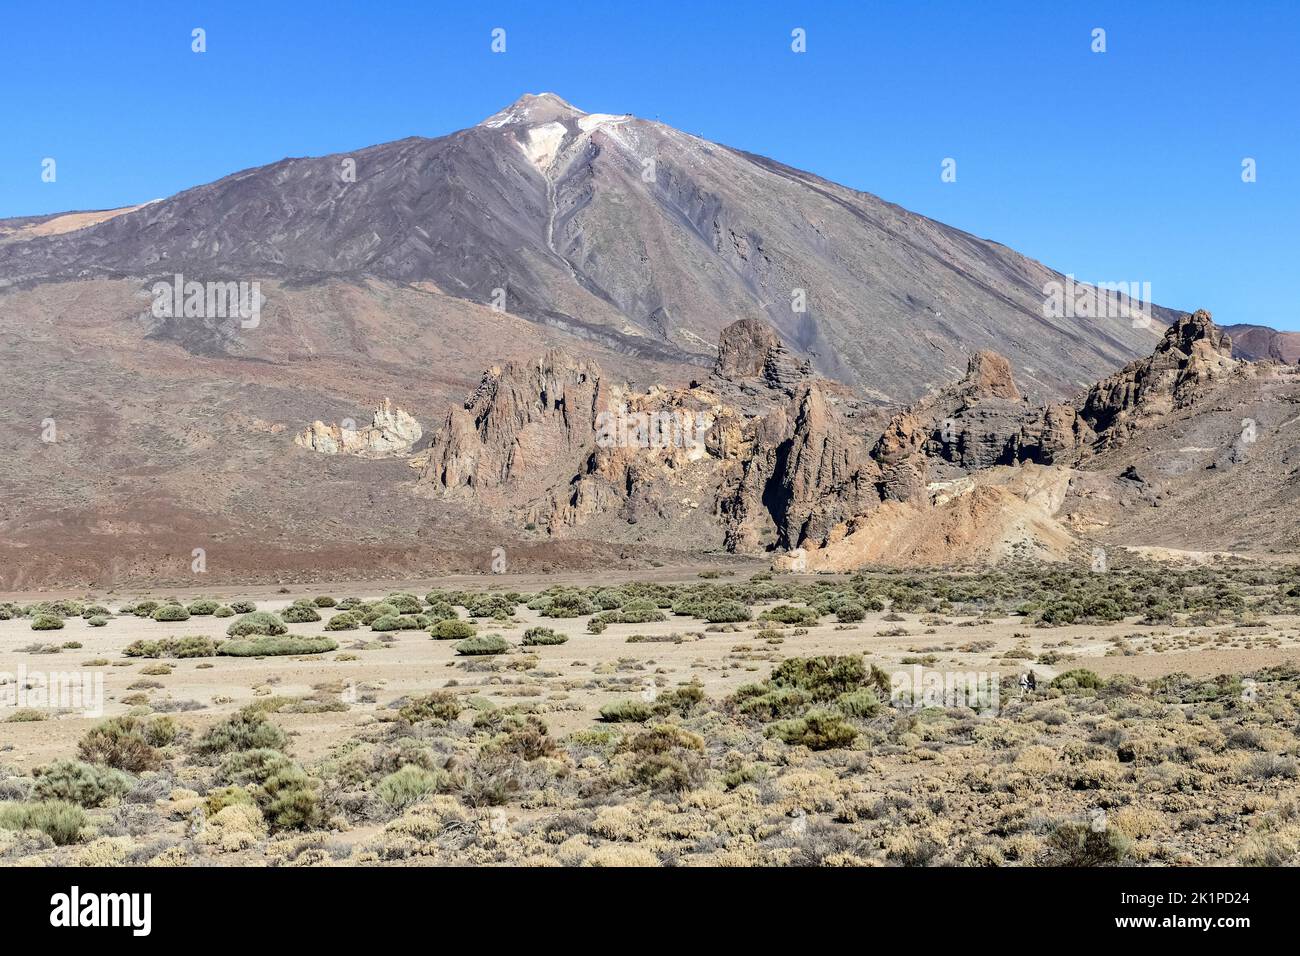 Scenery around Pico del Teide at Teide National Park in Tenerife, Canary Islands, Spain Stock Photo